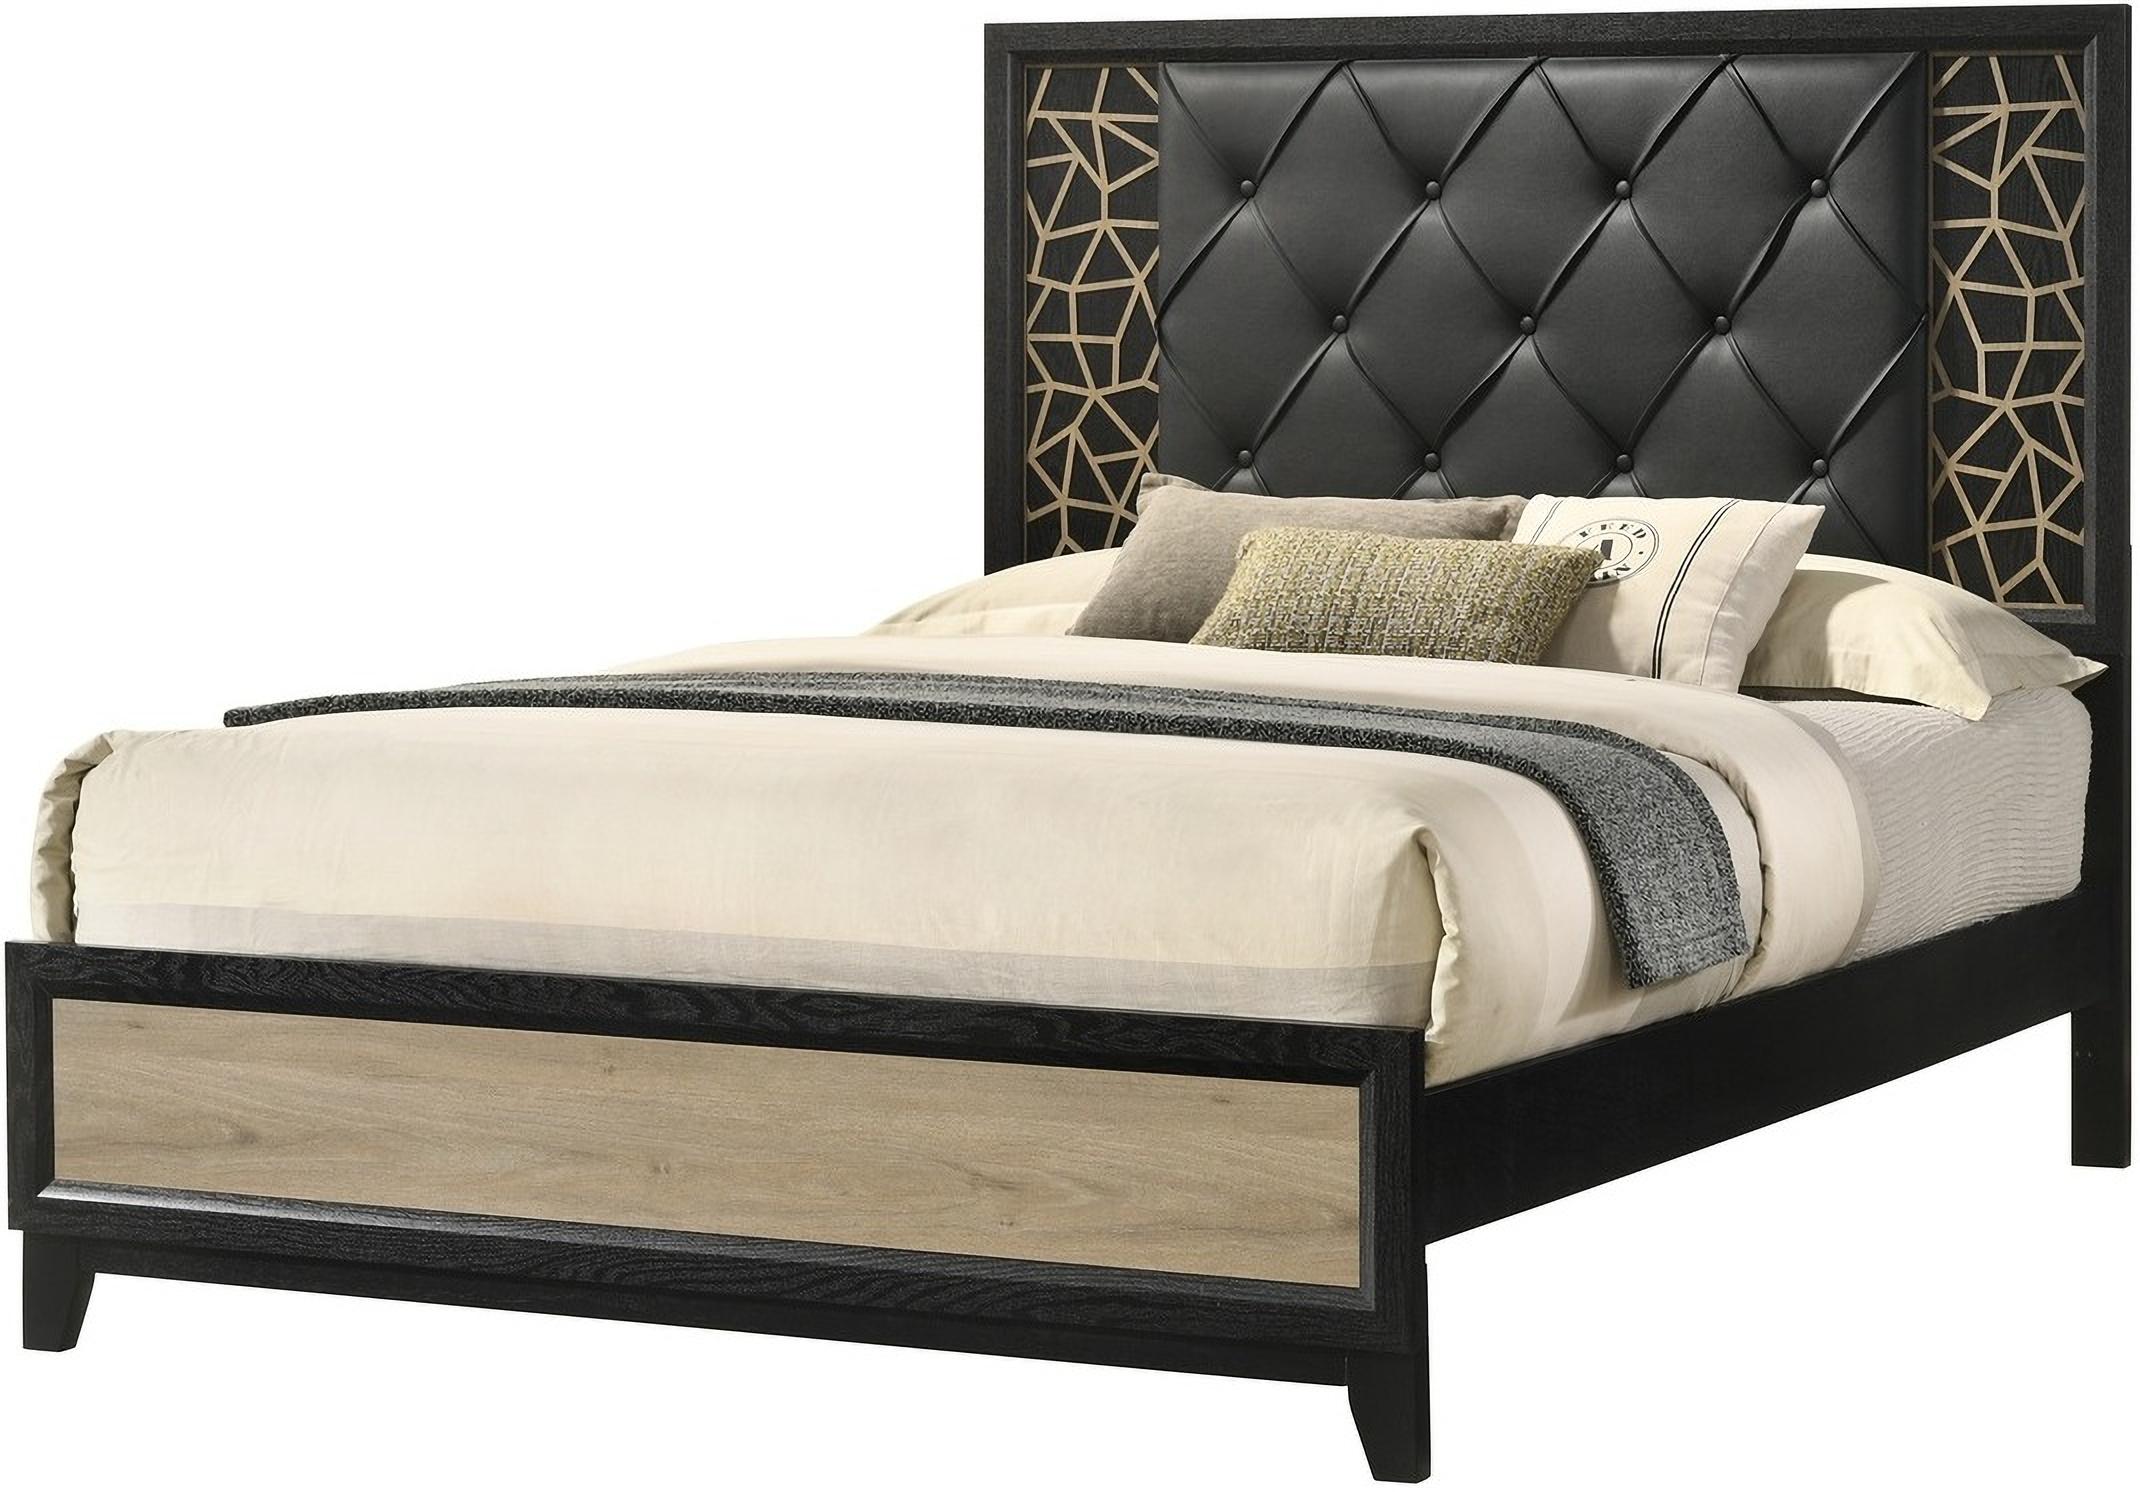 

    
Upholstered King Bed with Wooden Pattern In Black Selena Galaxy Home Contemporary
